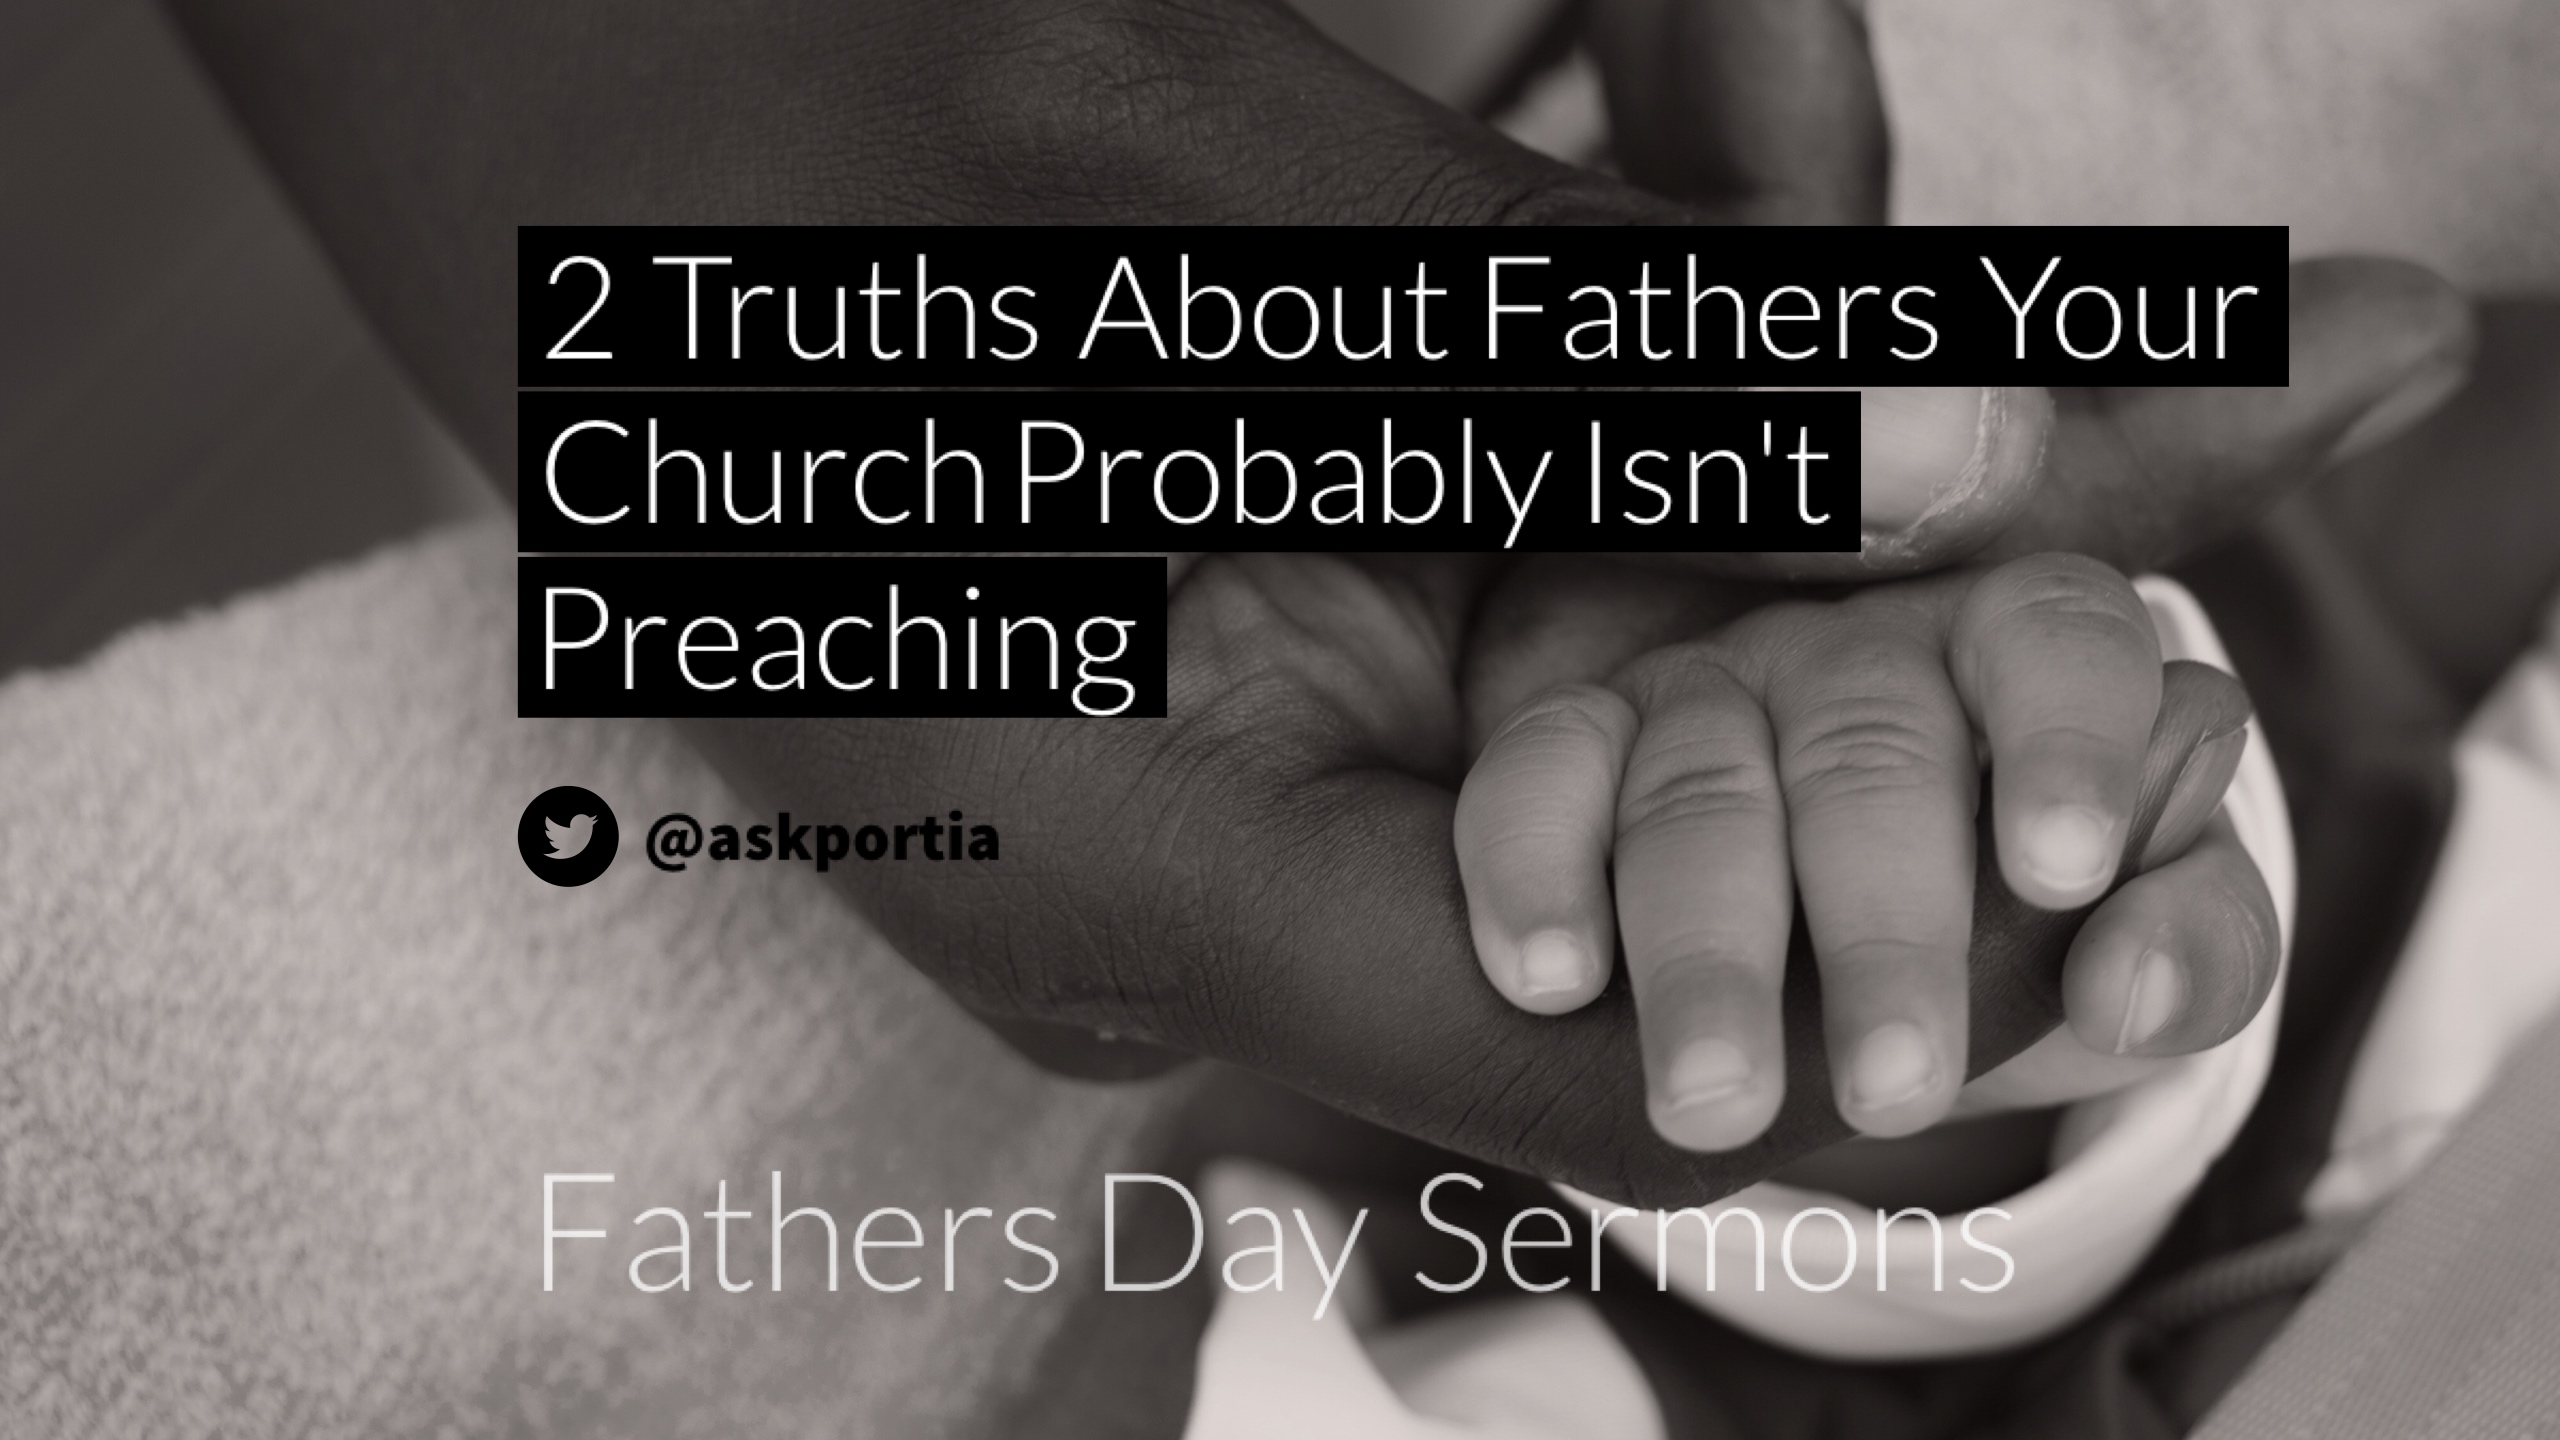 2 Truths for Fathers Day